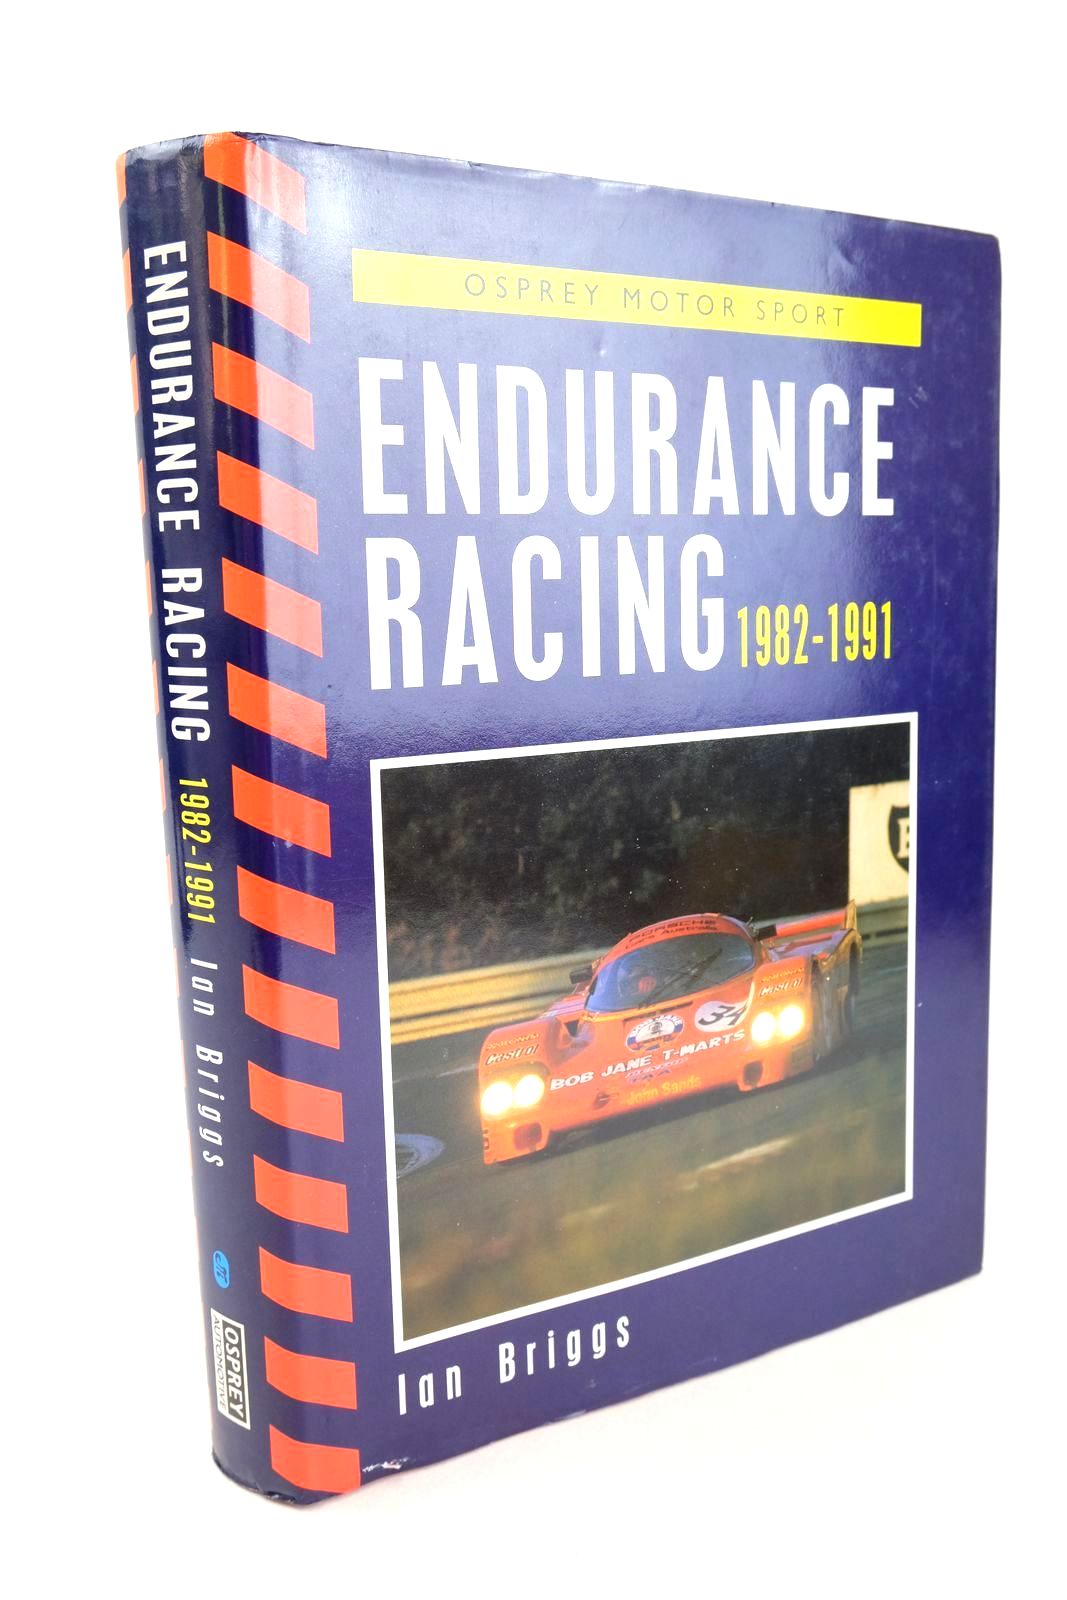 Photo of ENDURANCE RACING 1982-1991 written by Briggs, Ian published by Osprey Automotive (STOCK CODE: 1327559)  for sale by Stella & Rose's Books